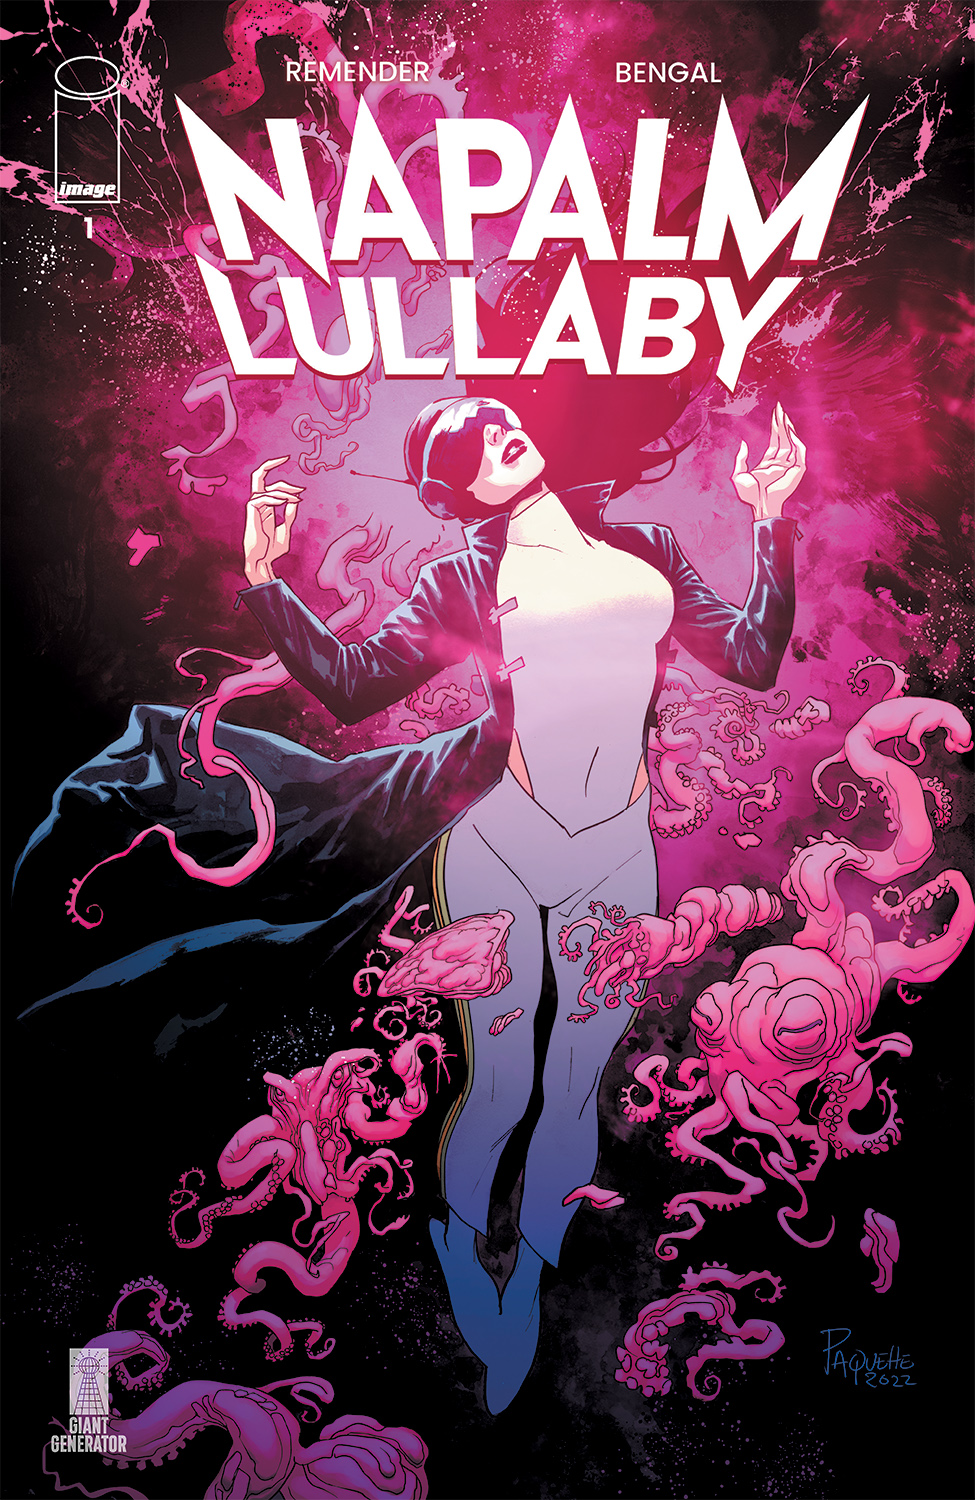 Napalm Lullaby #1 1 for 10 Incentive Variant Yanick Paquette